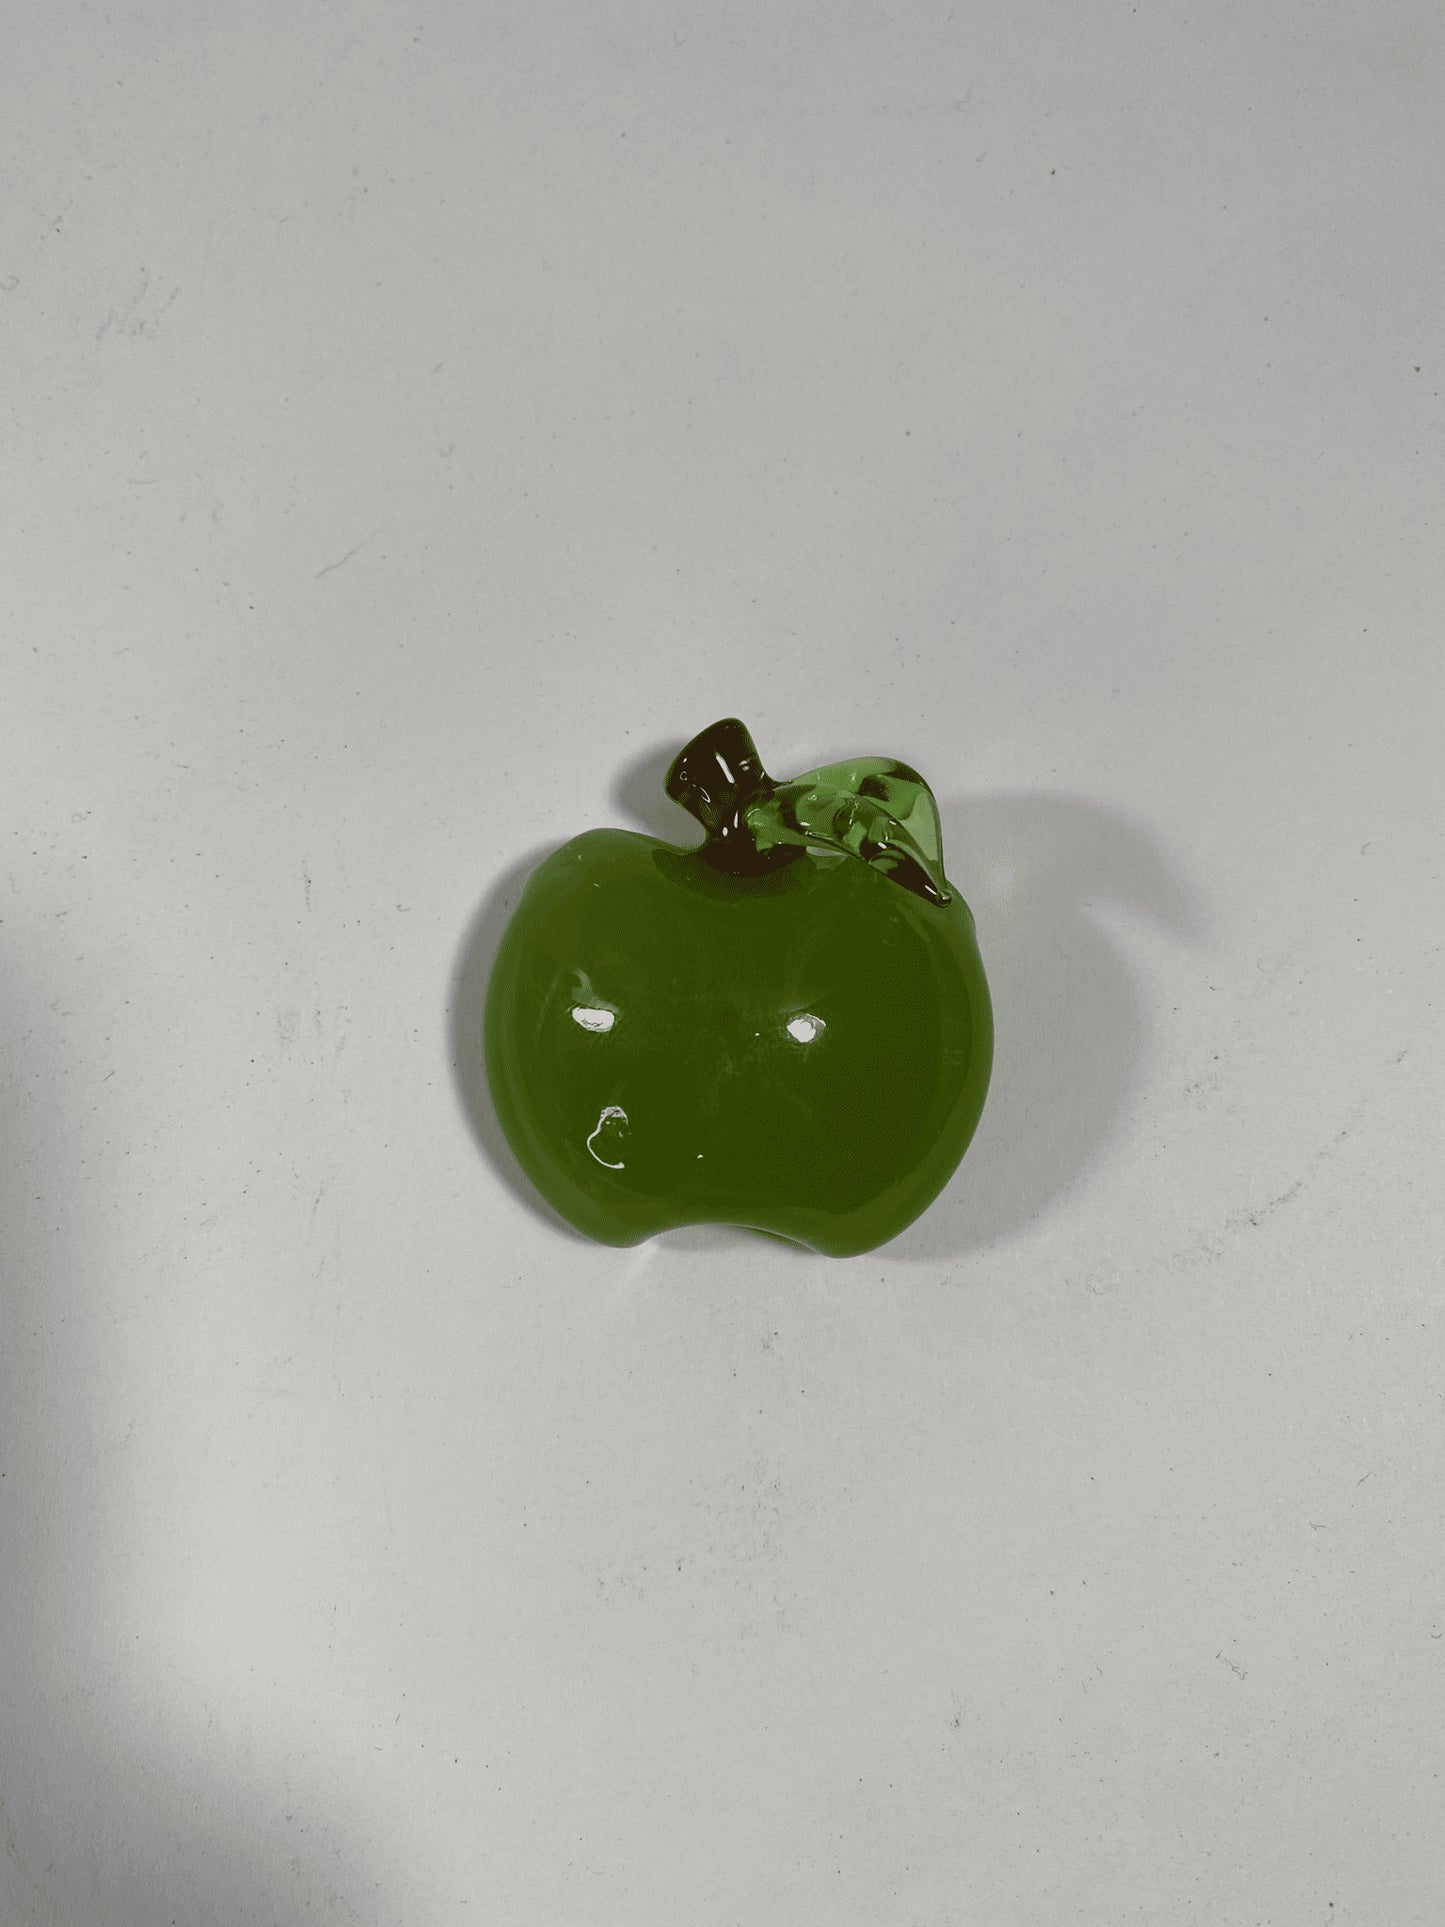 luxurious glass pendant - Green Apple Pendant by Pouch Glass